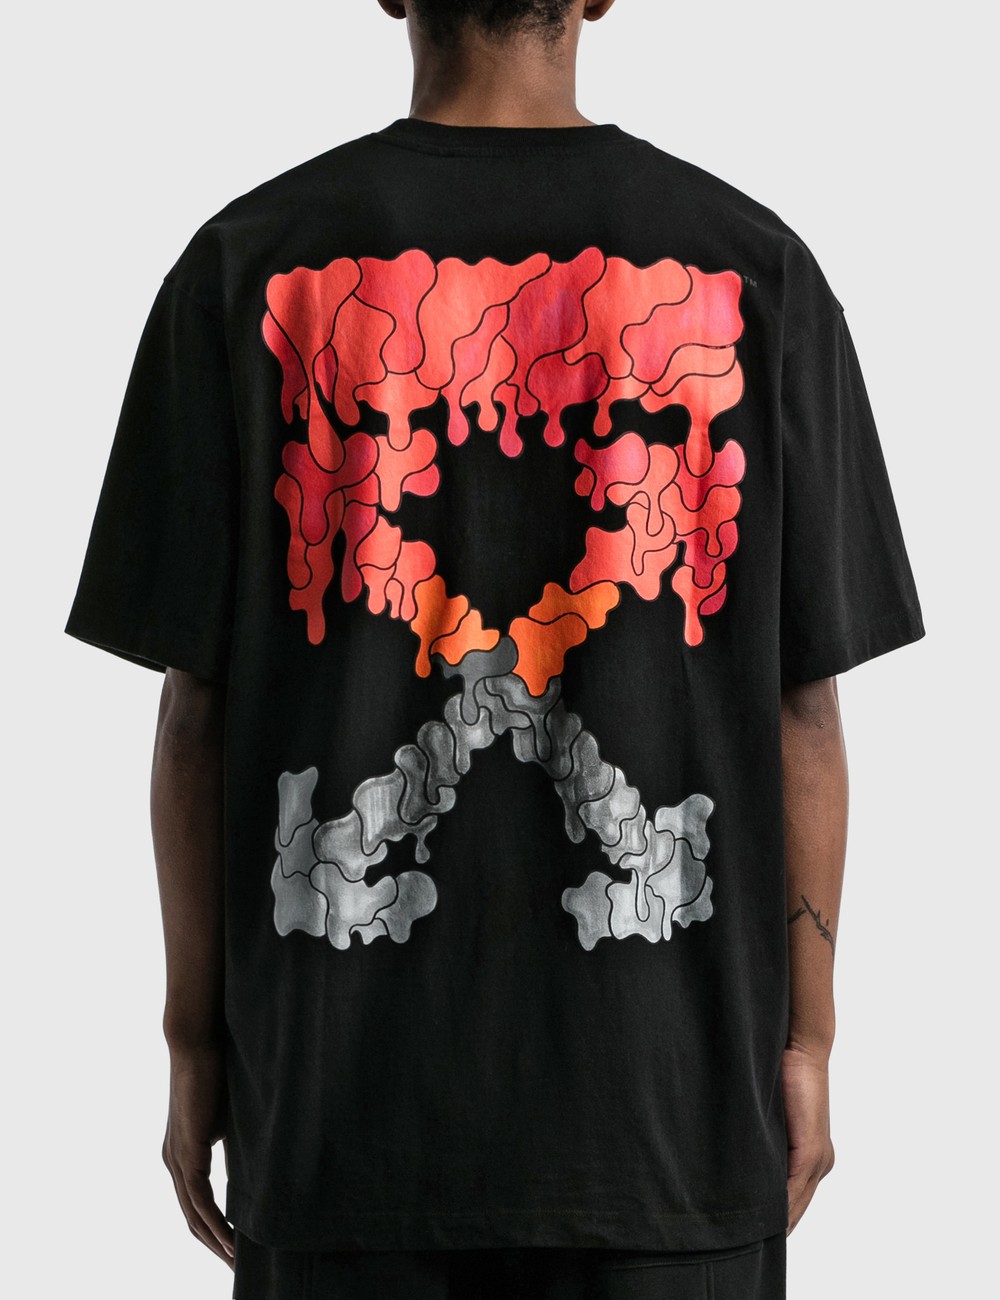 Off-White Red Market T-Shirt Black - EXIT Streetwear